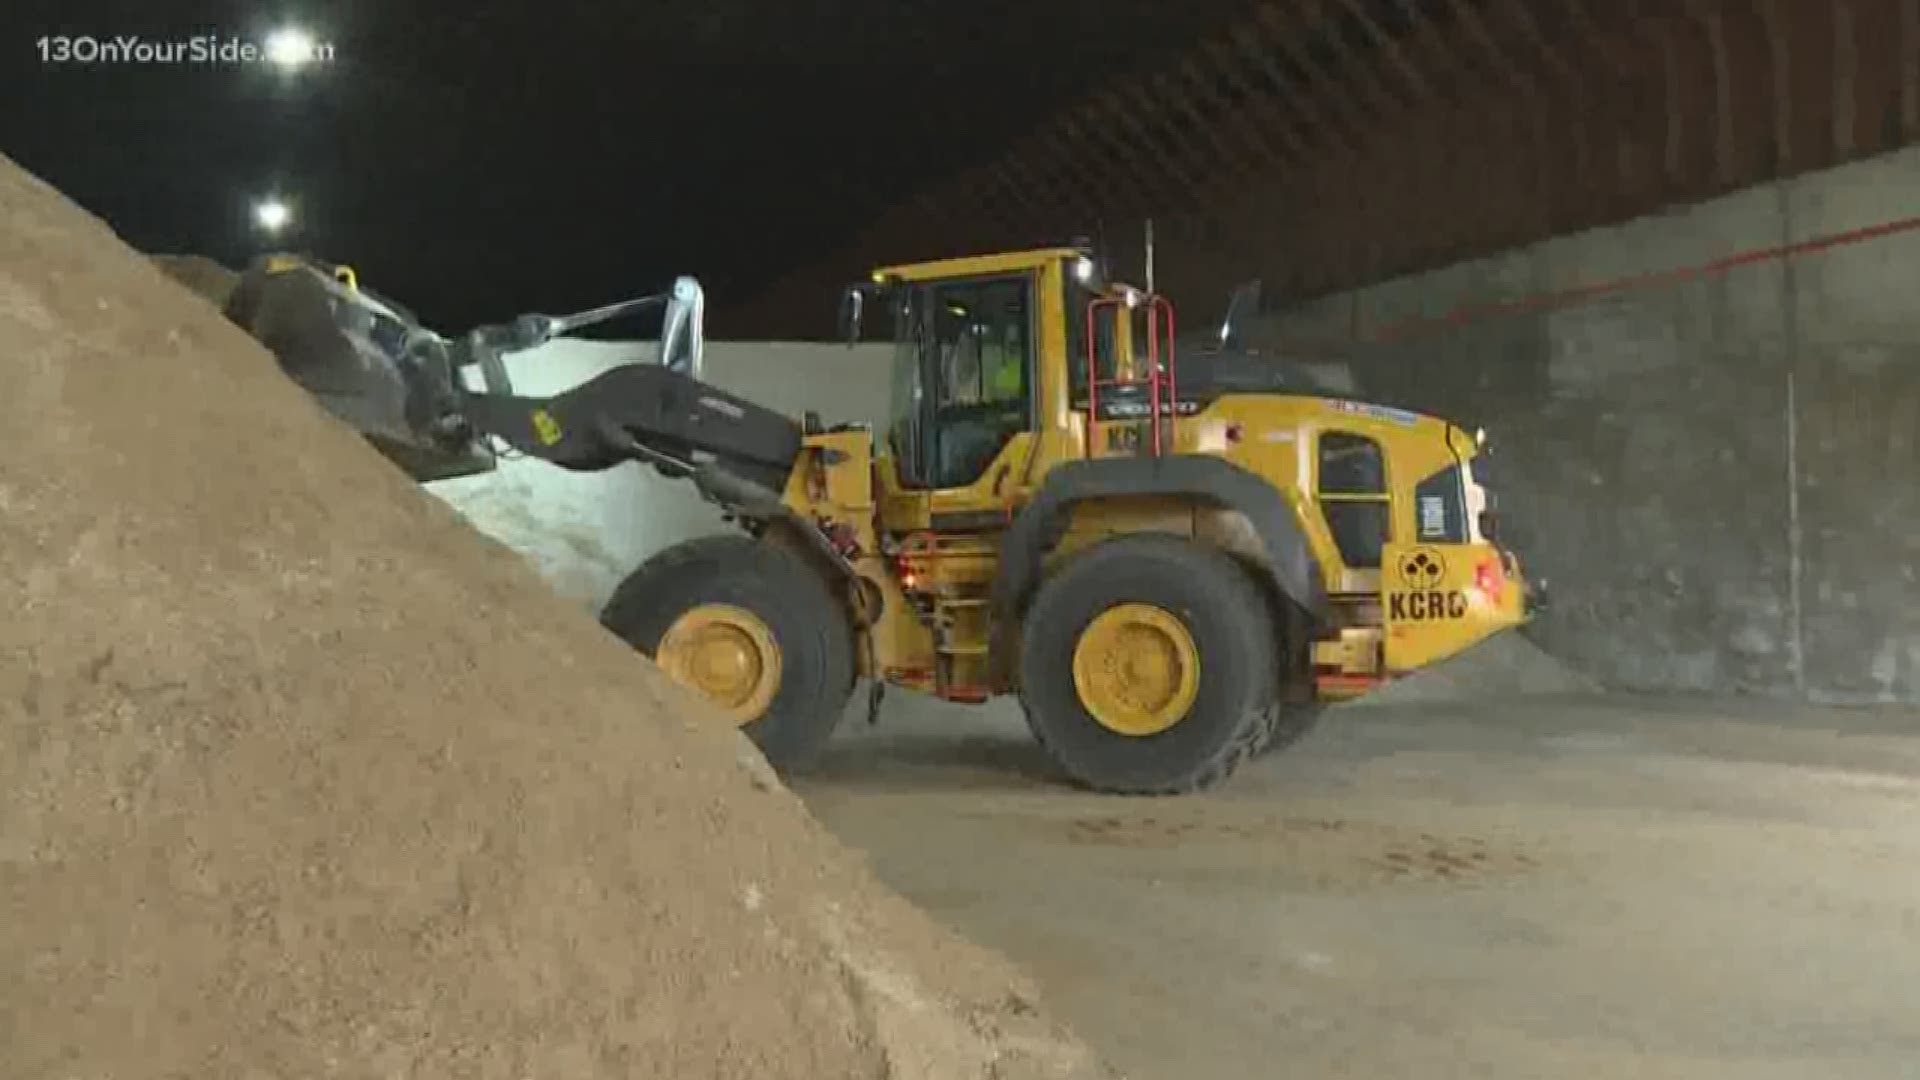 With the winter weather on the way, local road commissions are preparing to keep drivers safe.